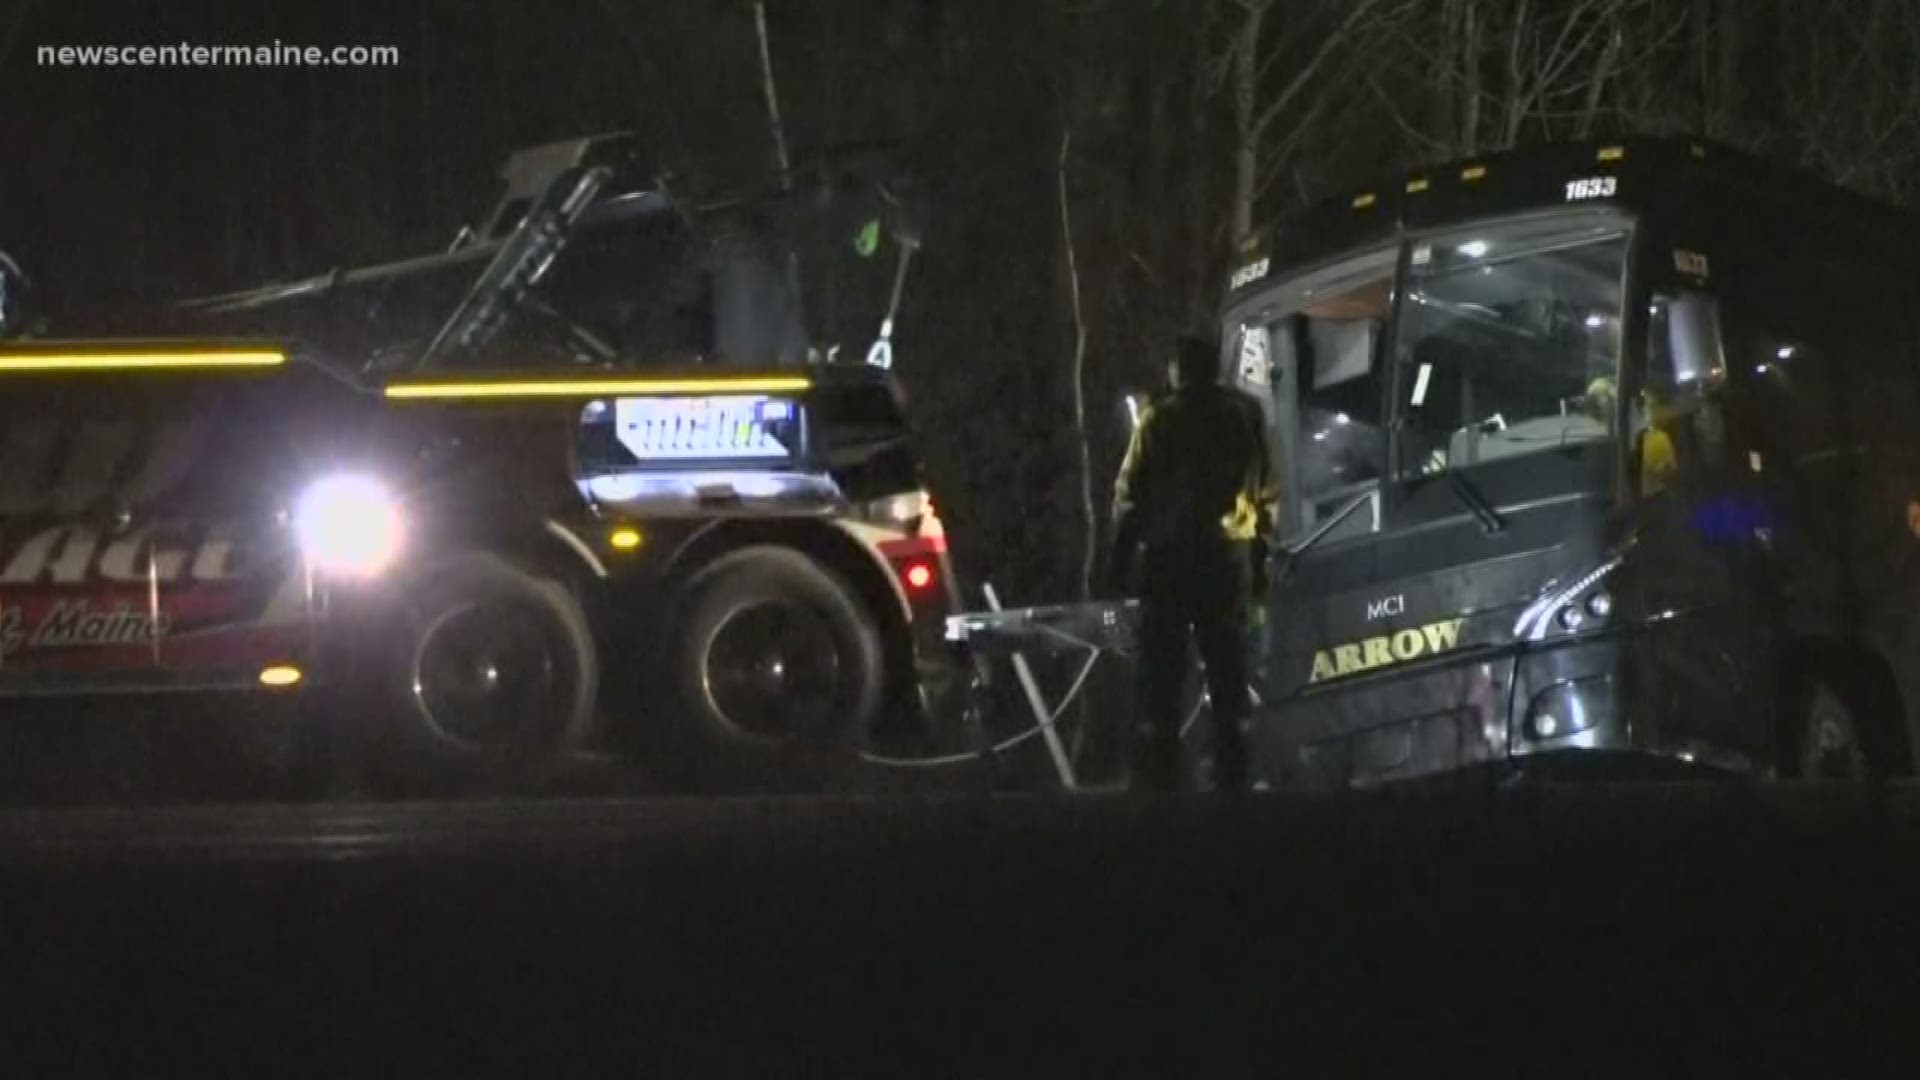 Maine State Police say a tour bus headed to Orono for a Christmas concert crashed on I-95 in Burnham late Tuesday night, injuring four people.